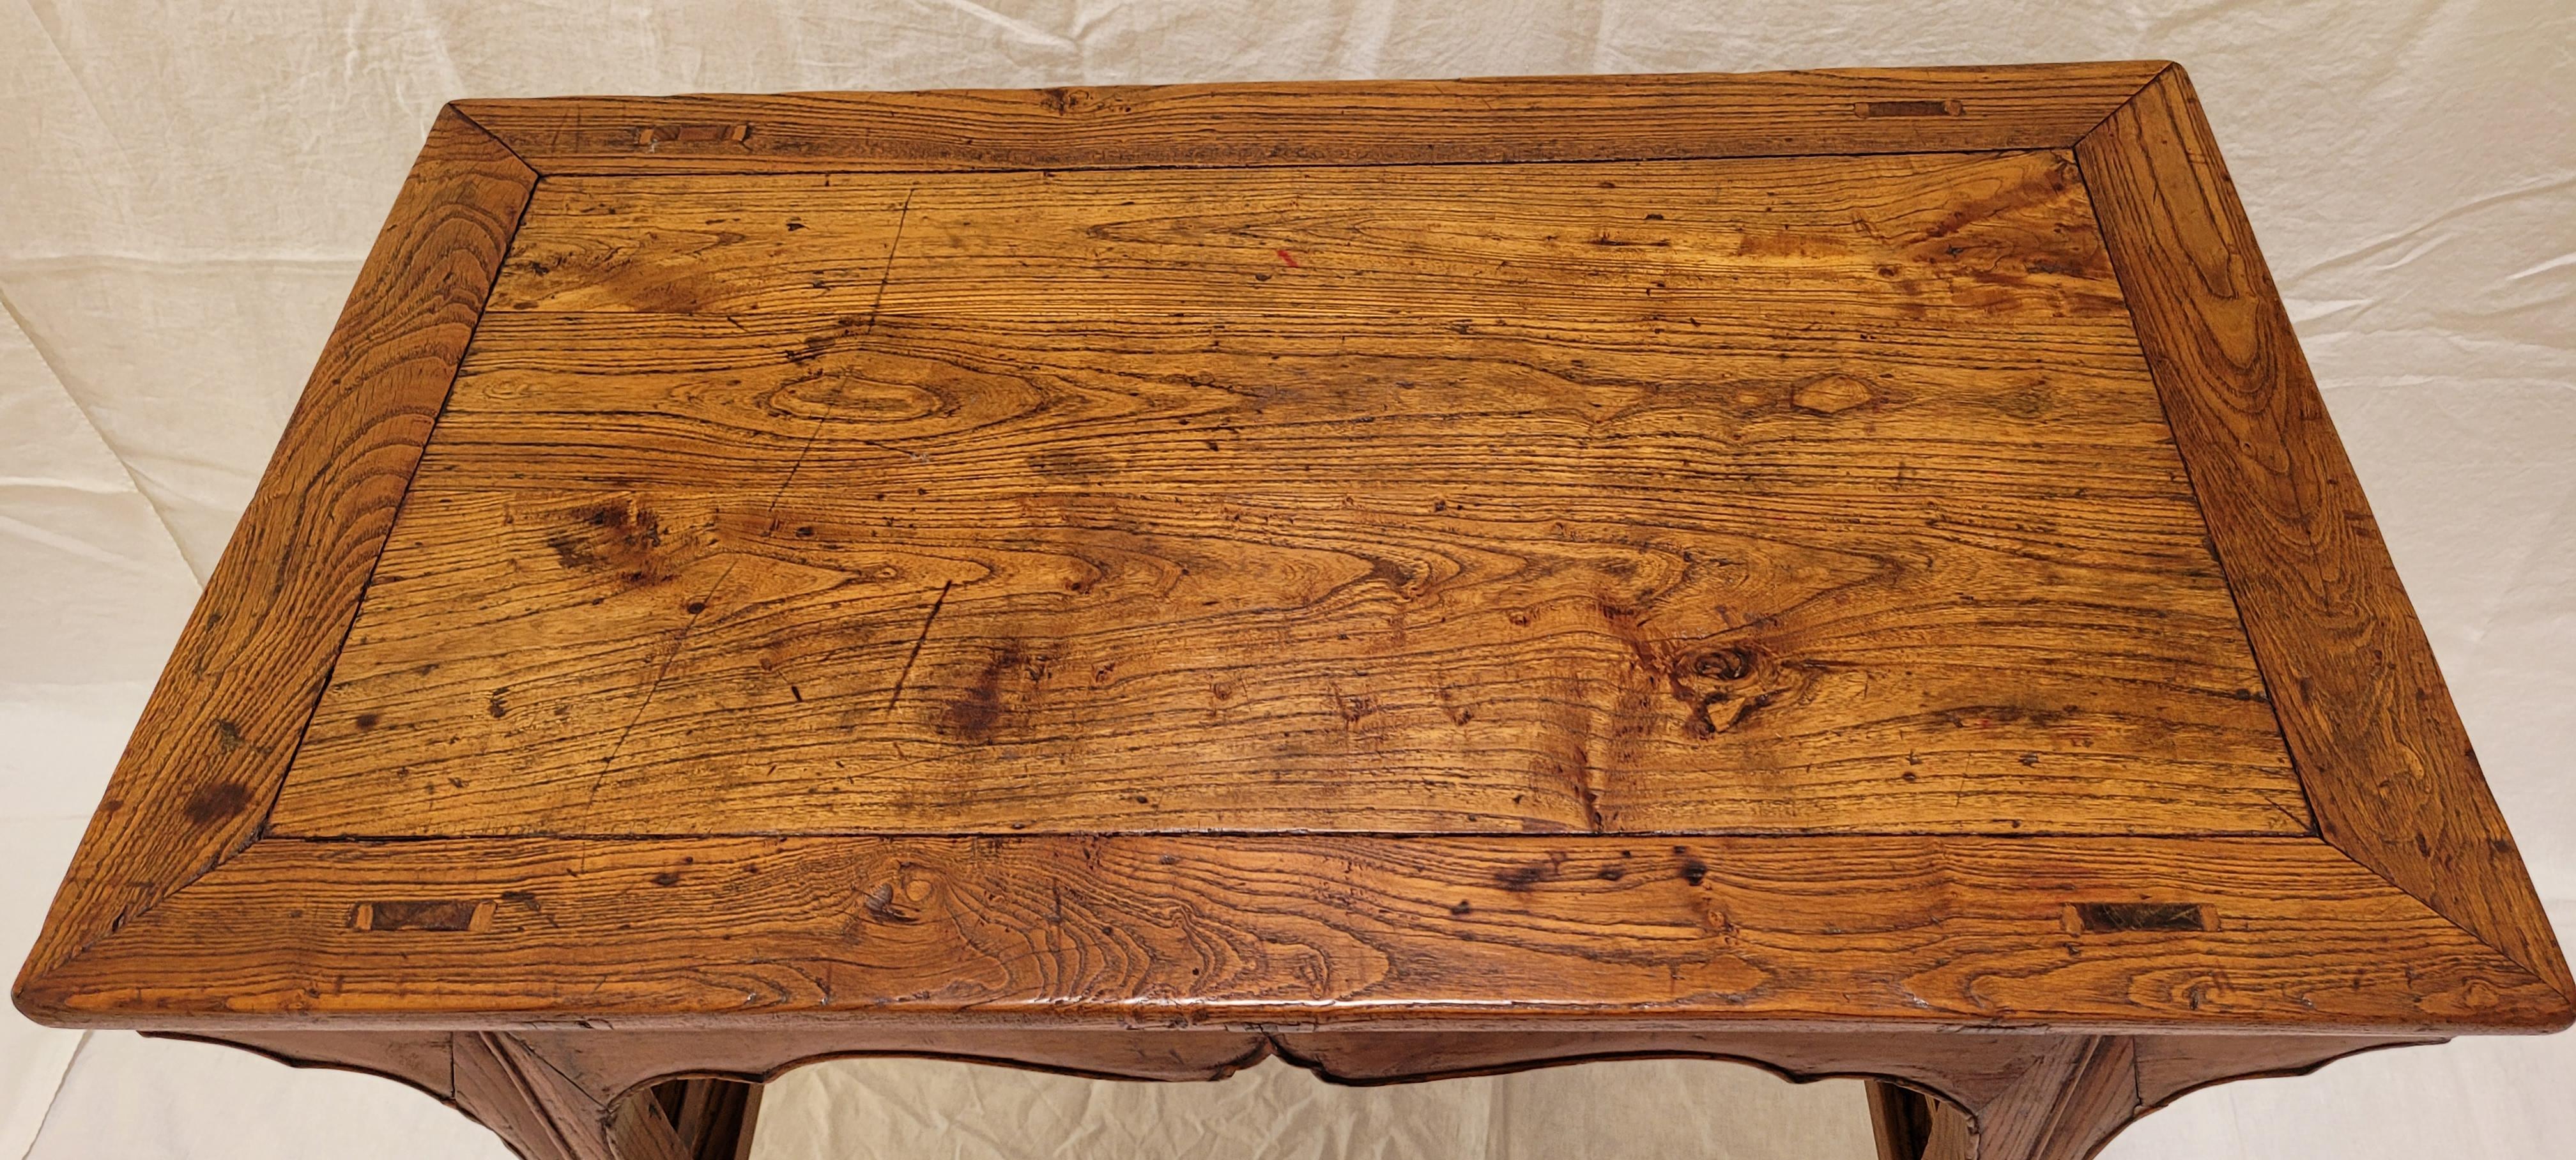 17th Century Wine Table - 1650 -1700 For Sale 12